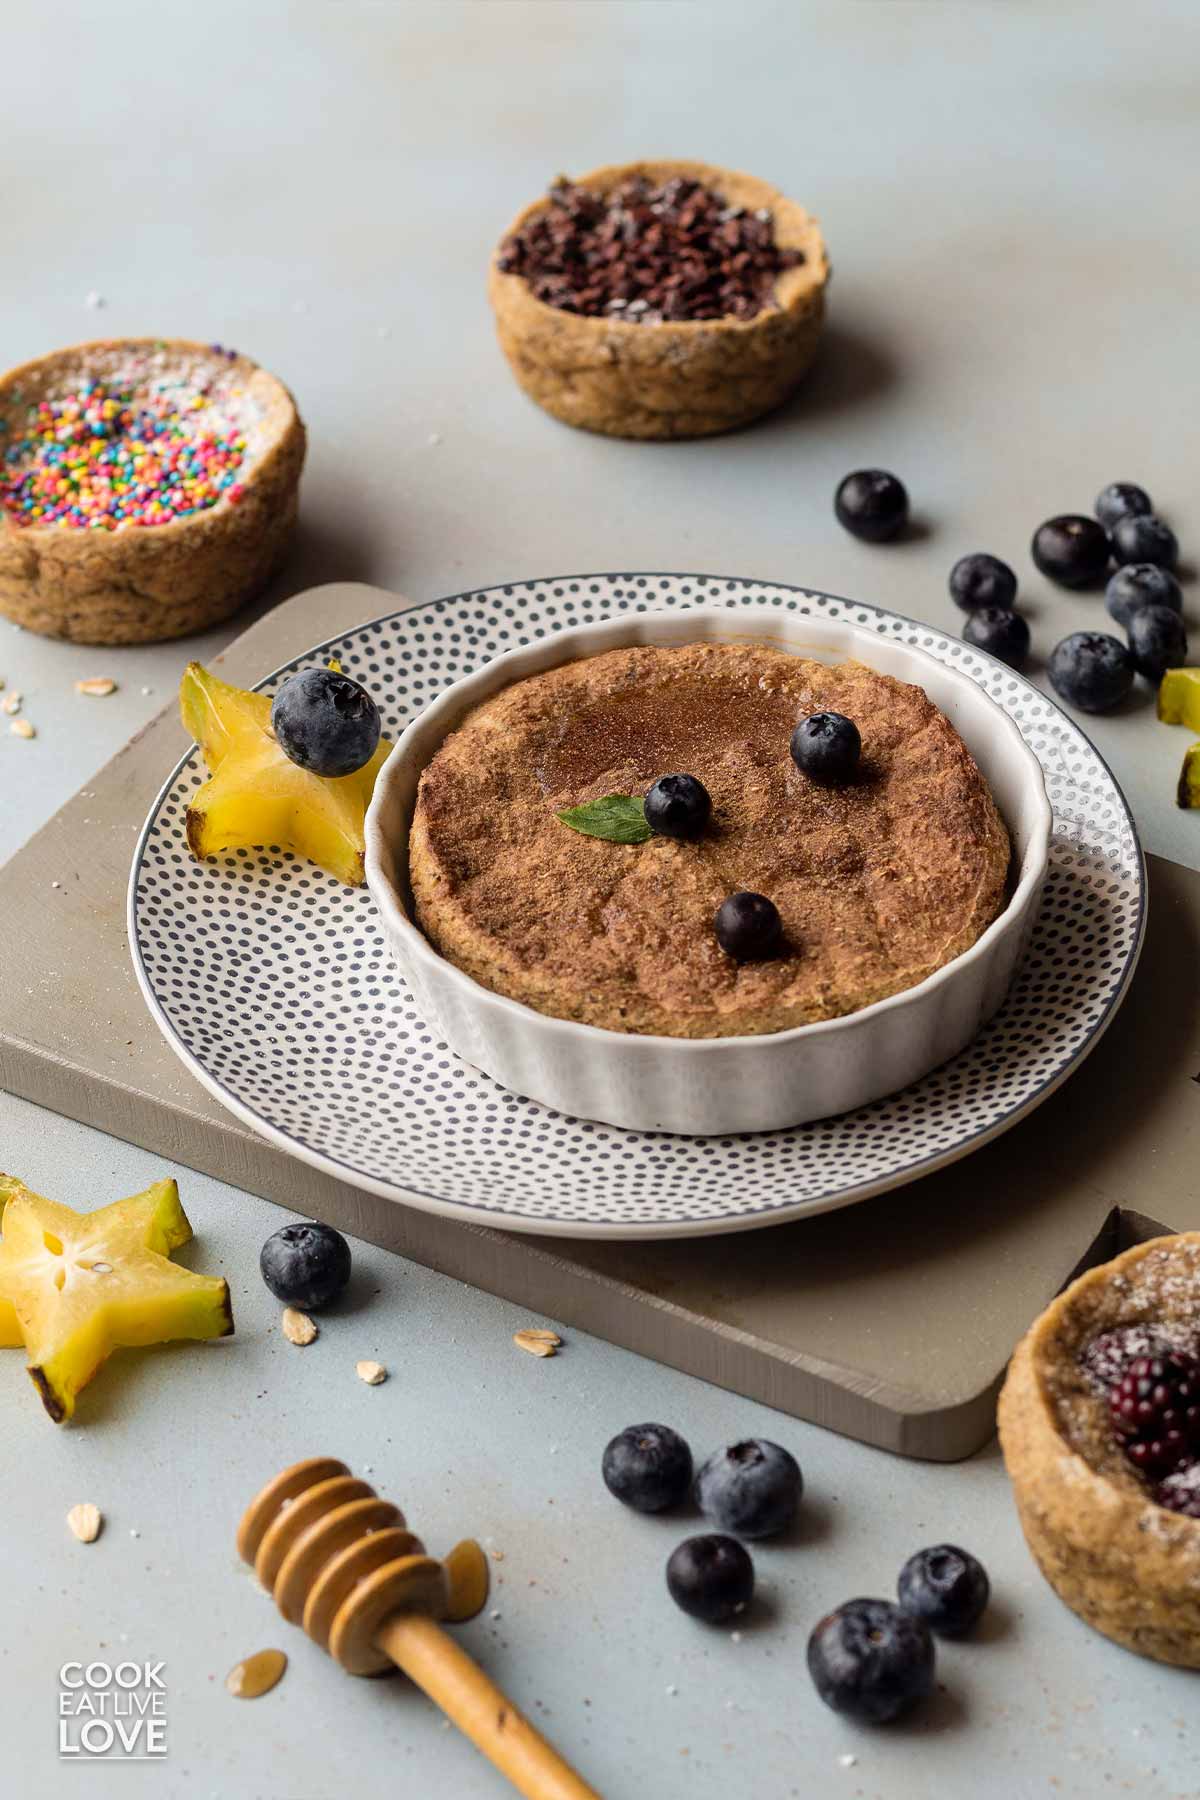 Healthy baked oats for one on a plate with berries and other flavors in background.